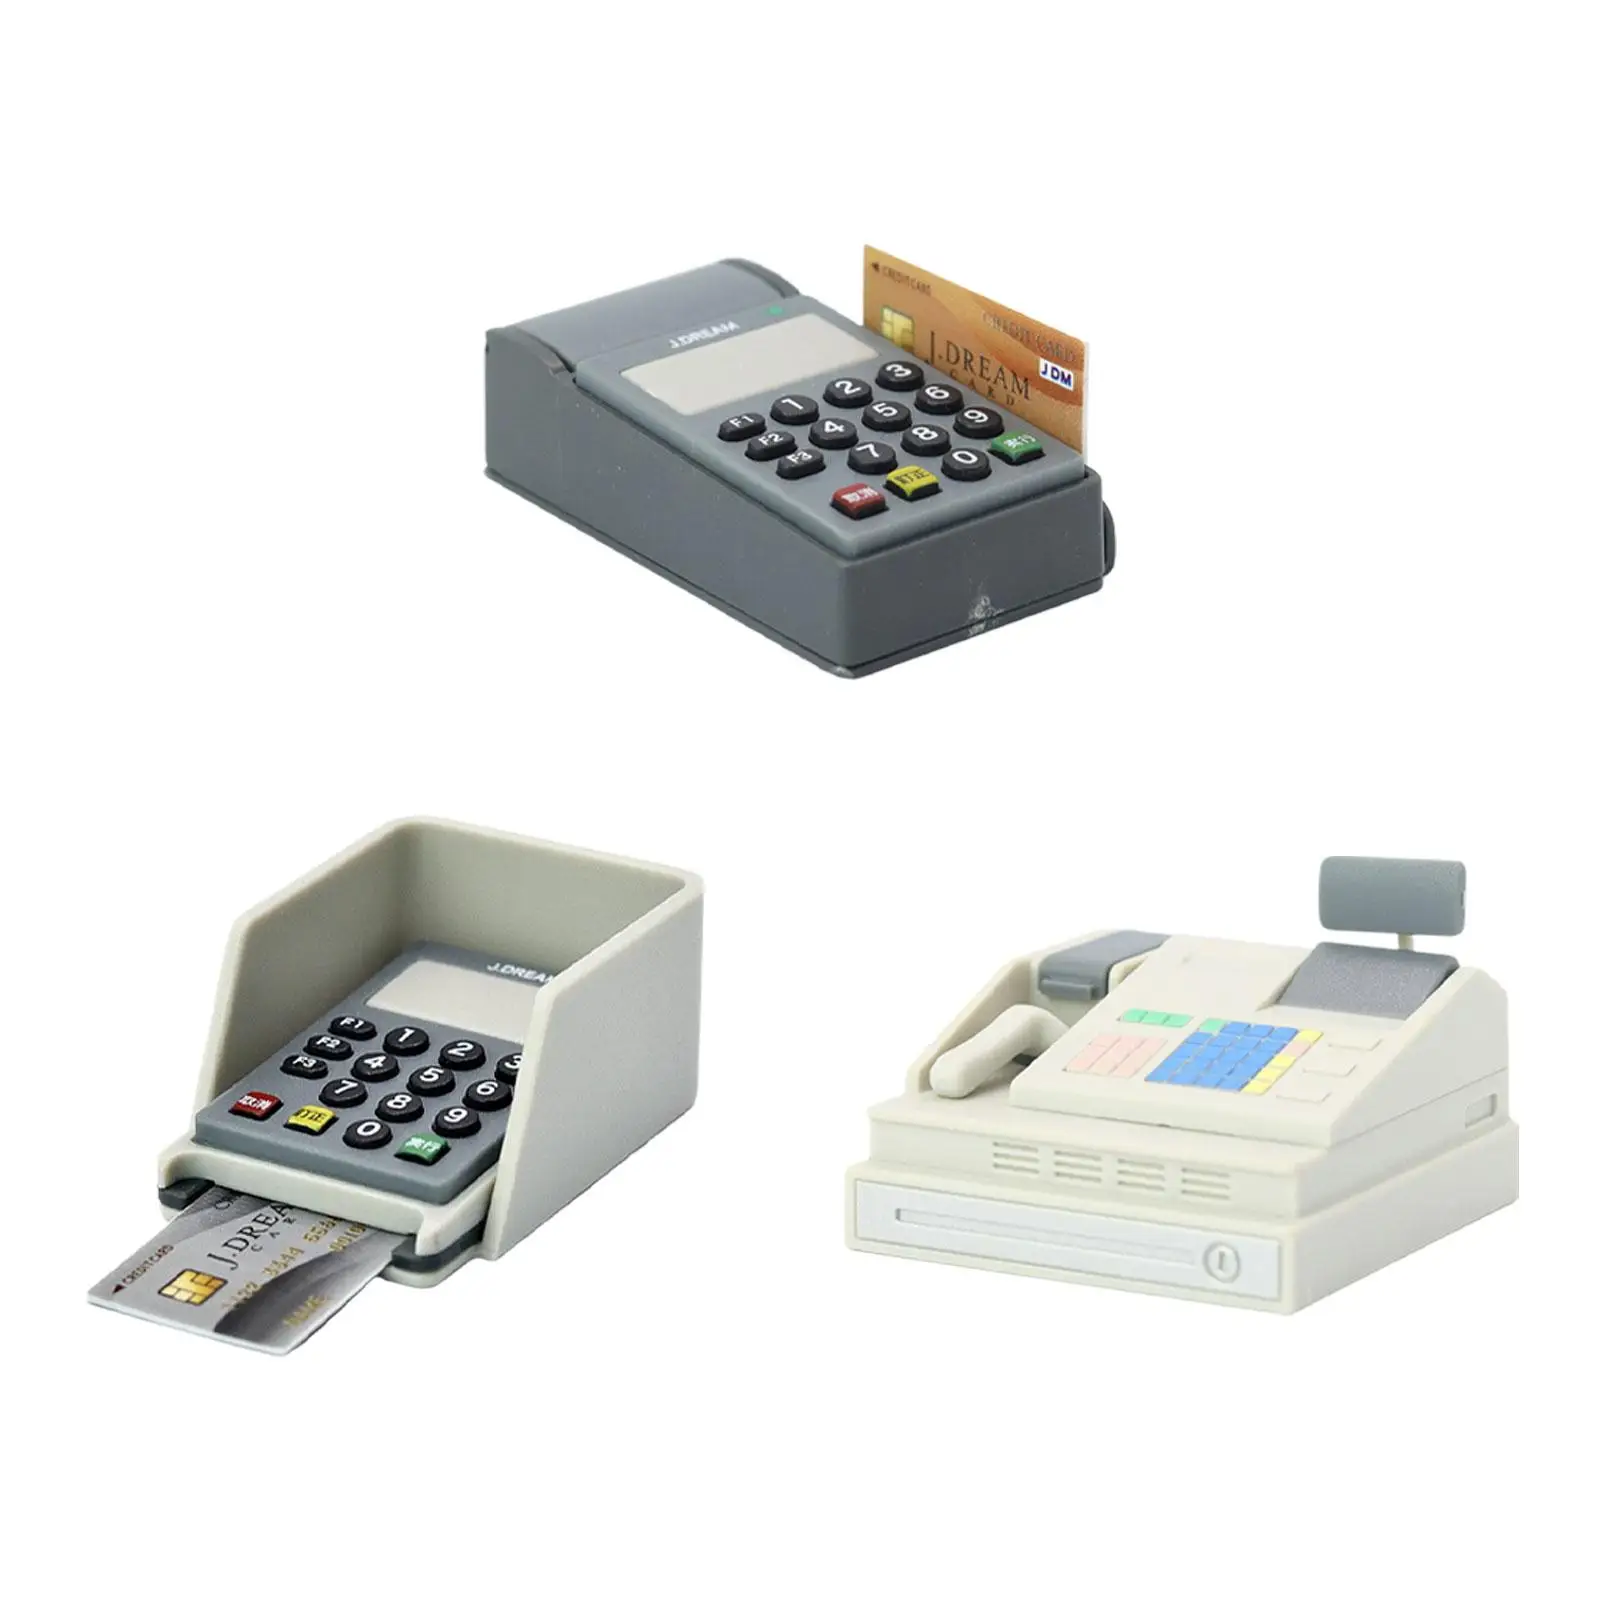 1/12 Scale Dollhouse Cash Register Ornaments Dollhouse Furniture Scene Model Props for Children Boys Kids Girls Holiday Gifts